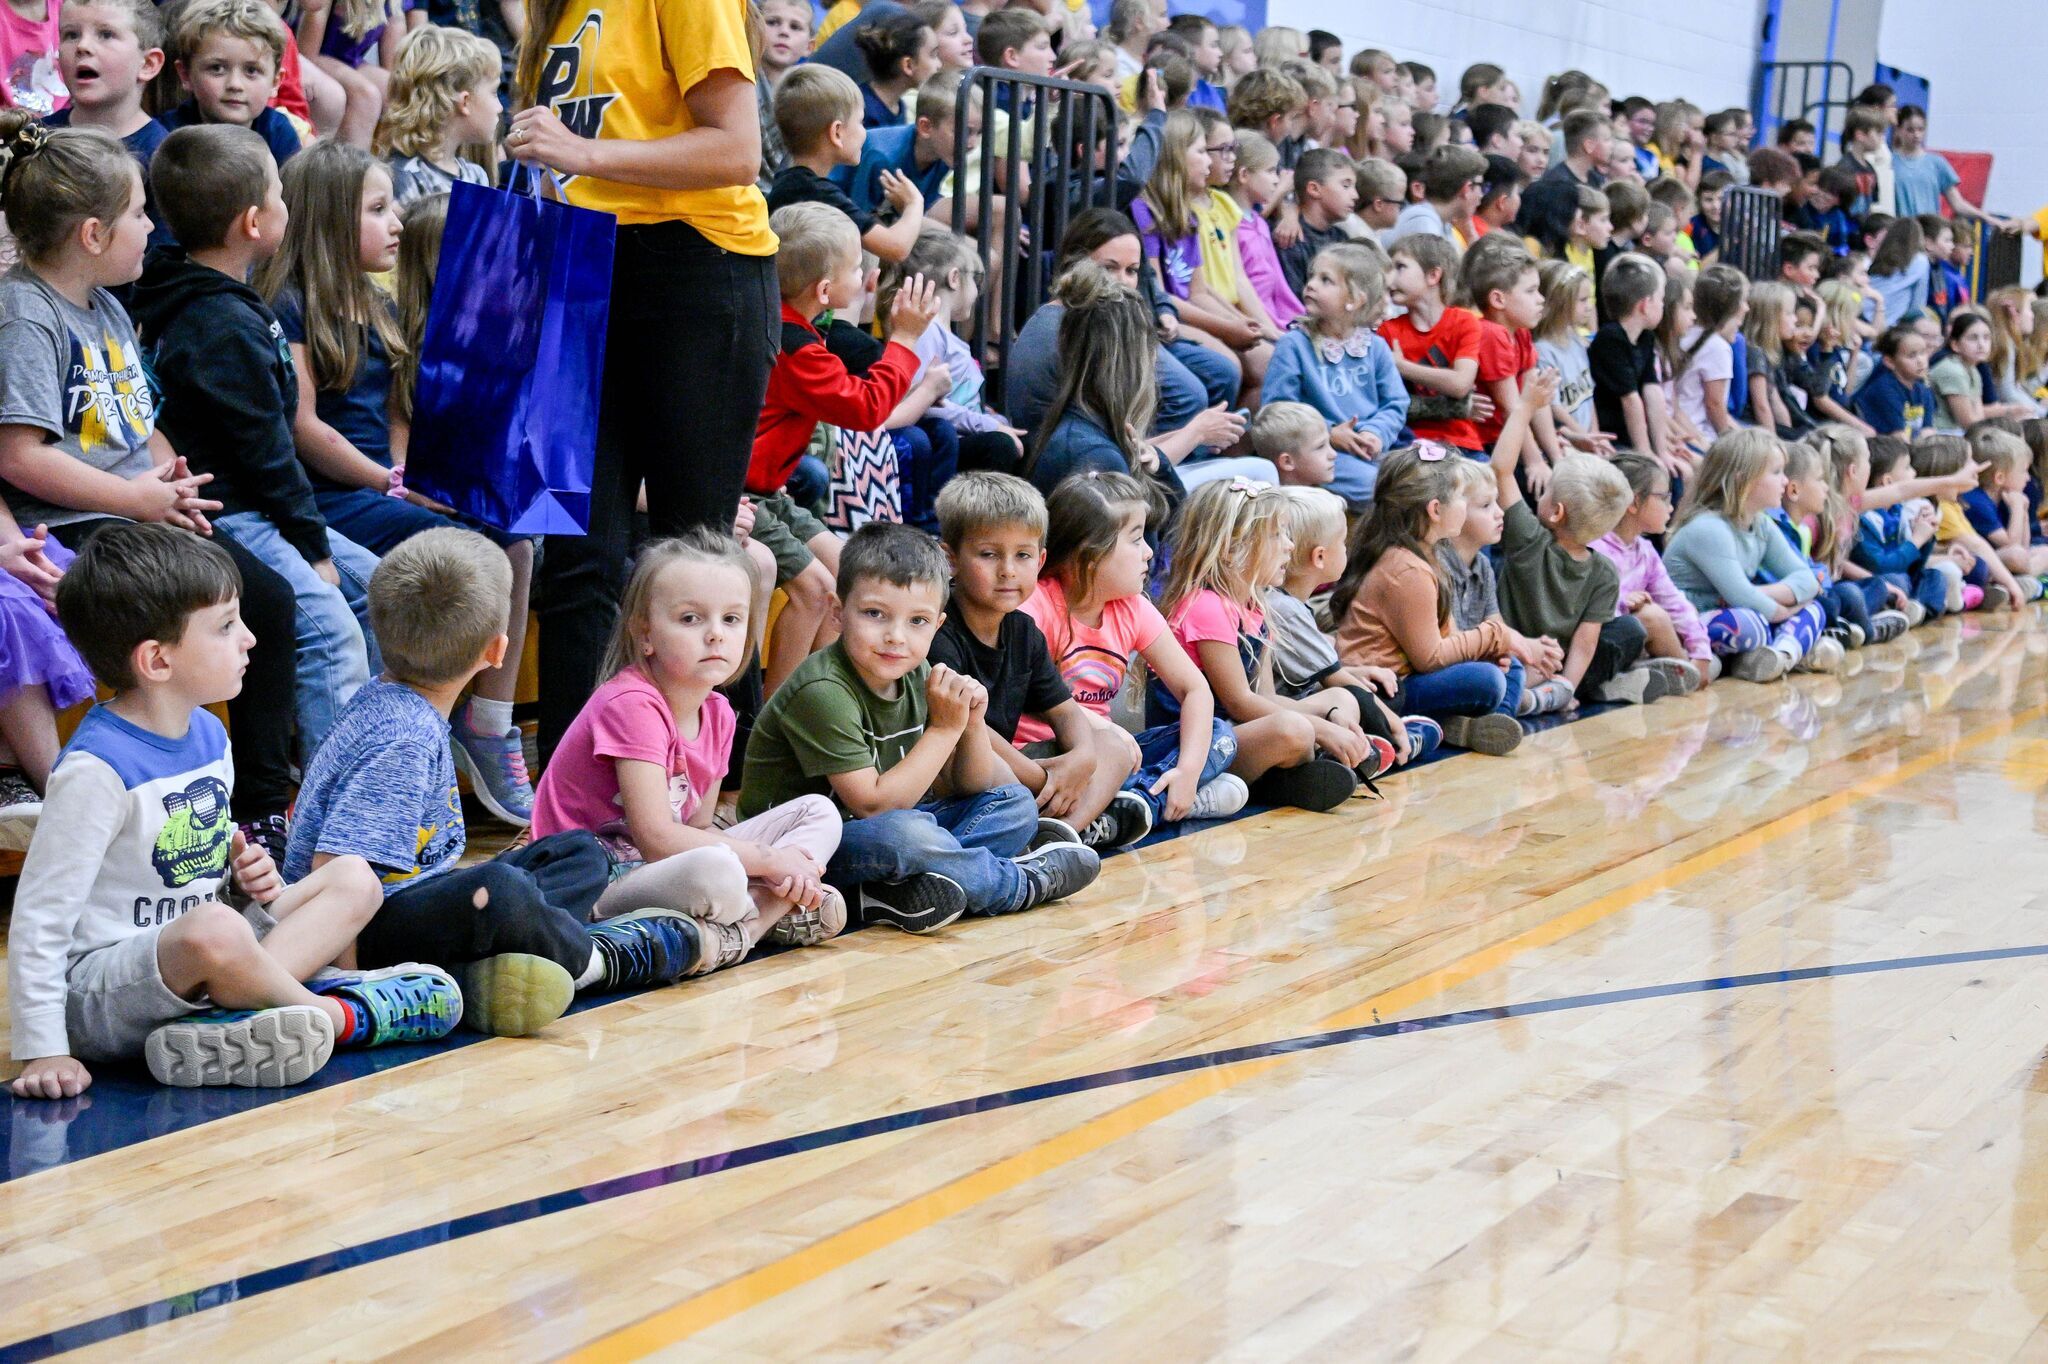 Elementary students sitting at assembly